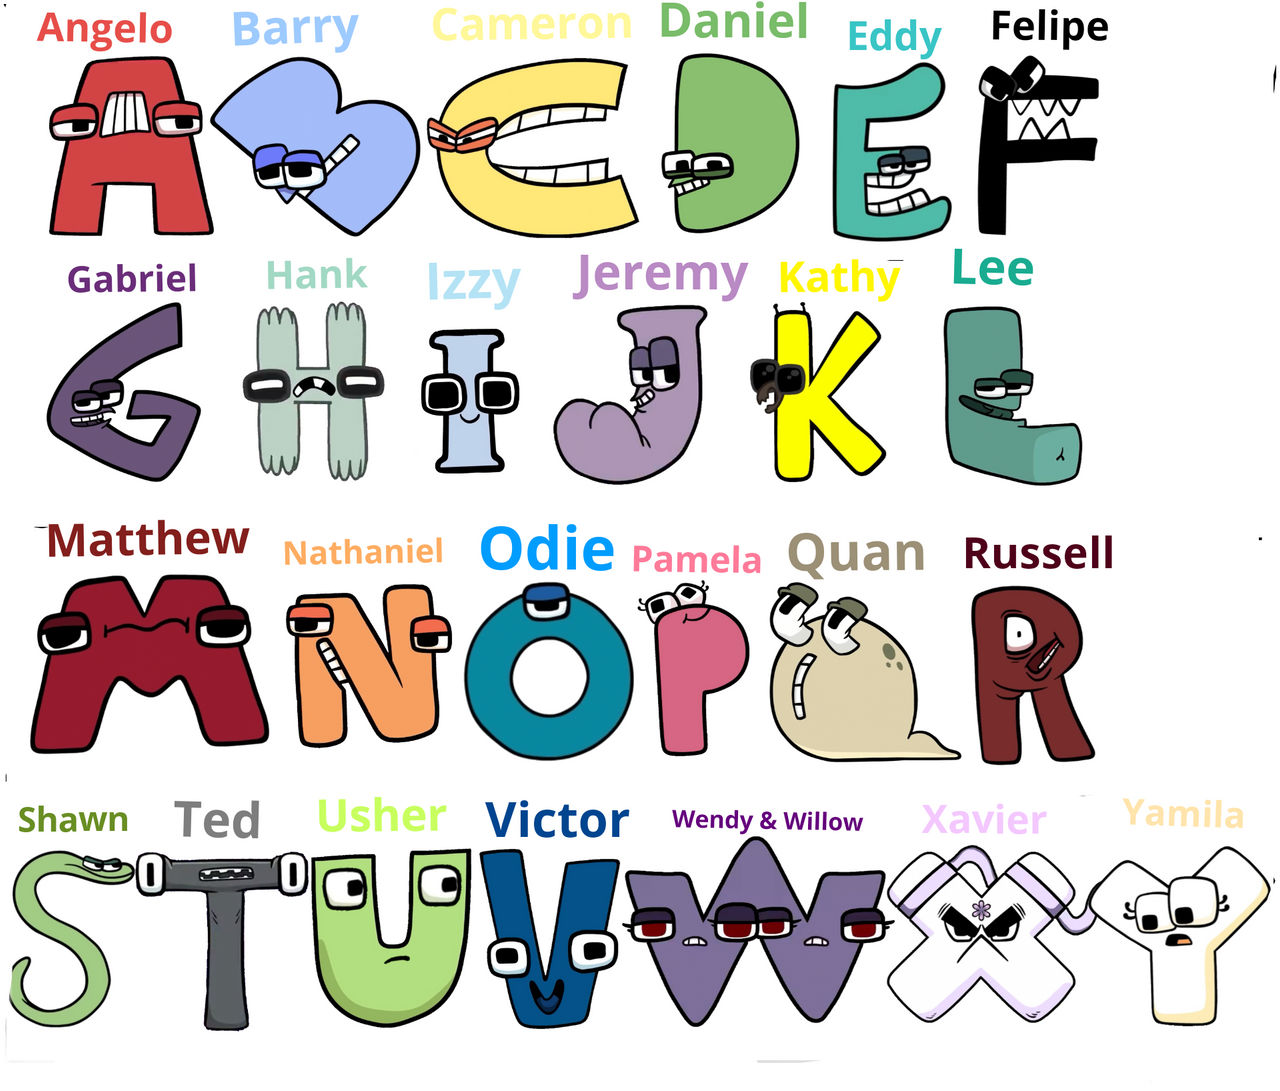 If Alphabet Lore Characters had names